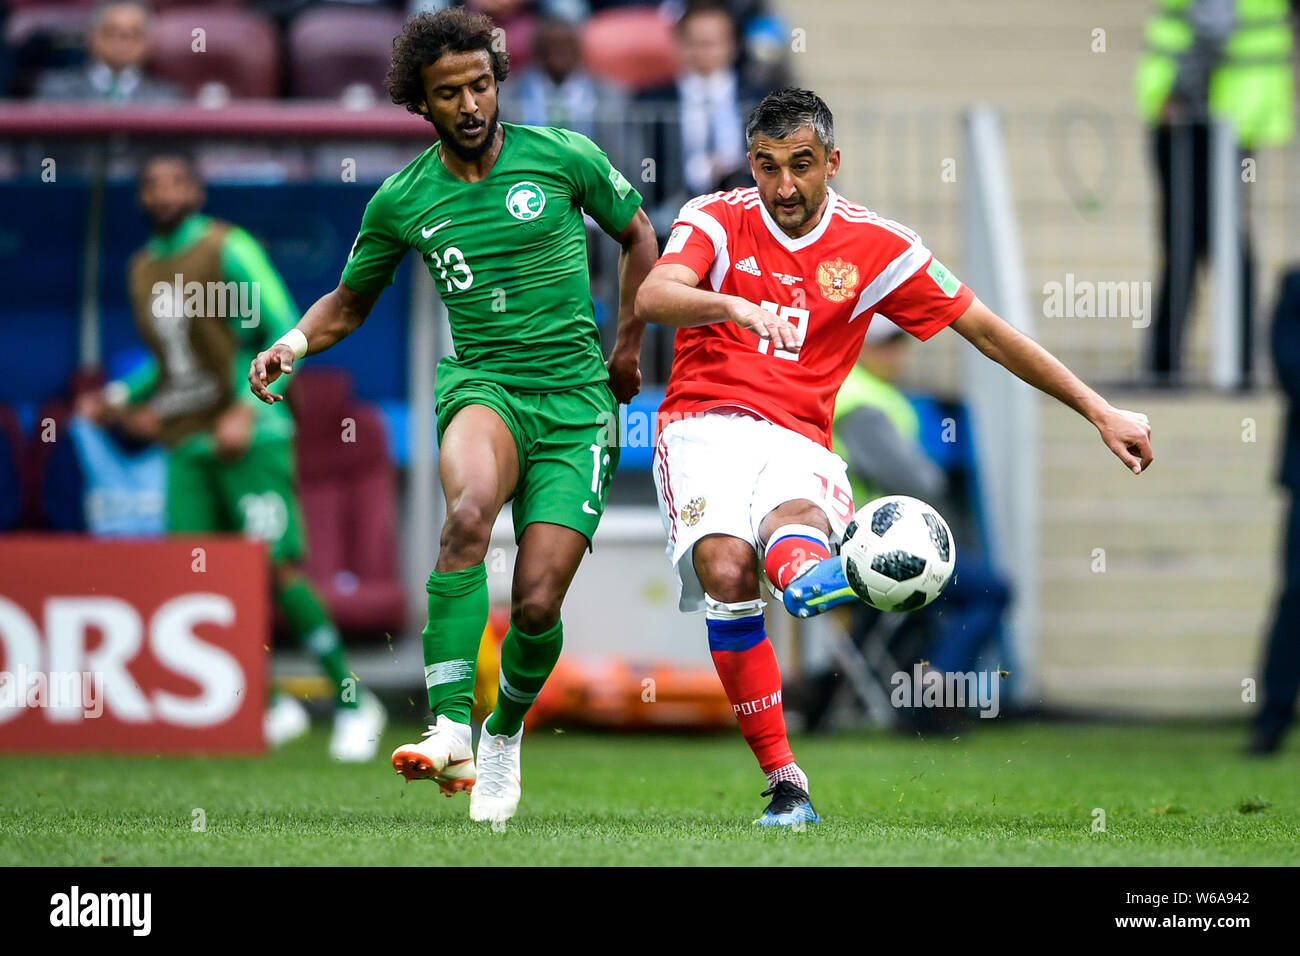 Aleksandr Samedov of Russia, right, challenges Yasser Al-Shahrani of Saudi Arabia in their Group A match during the 2018 FIFA World Cup in Moscow, Rus Stock Photo